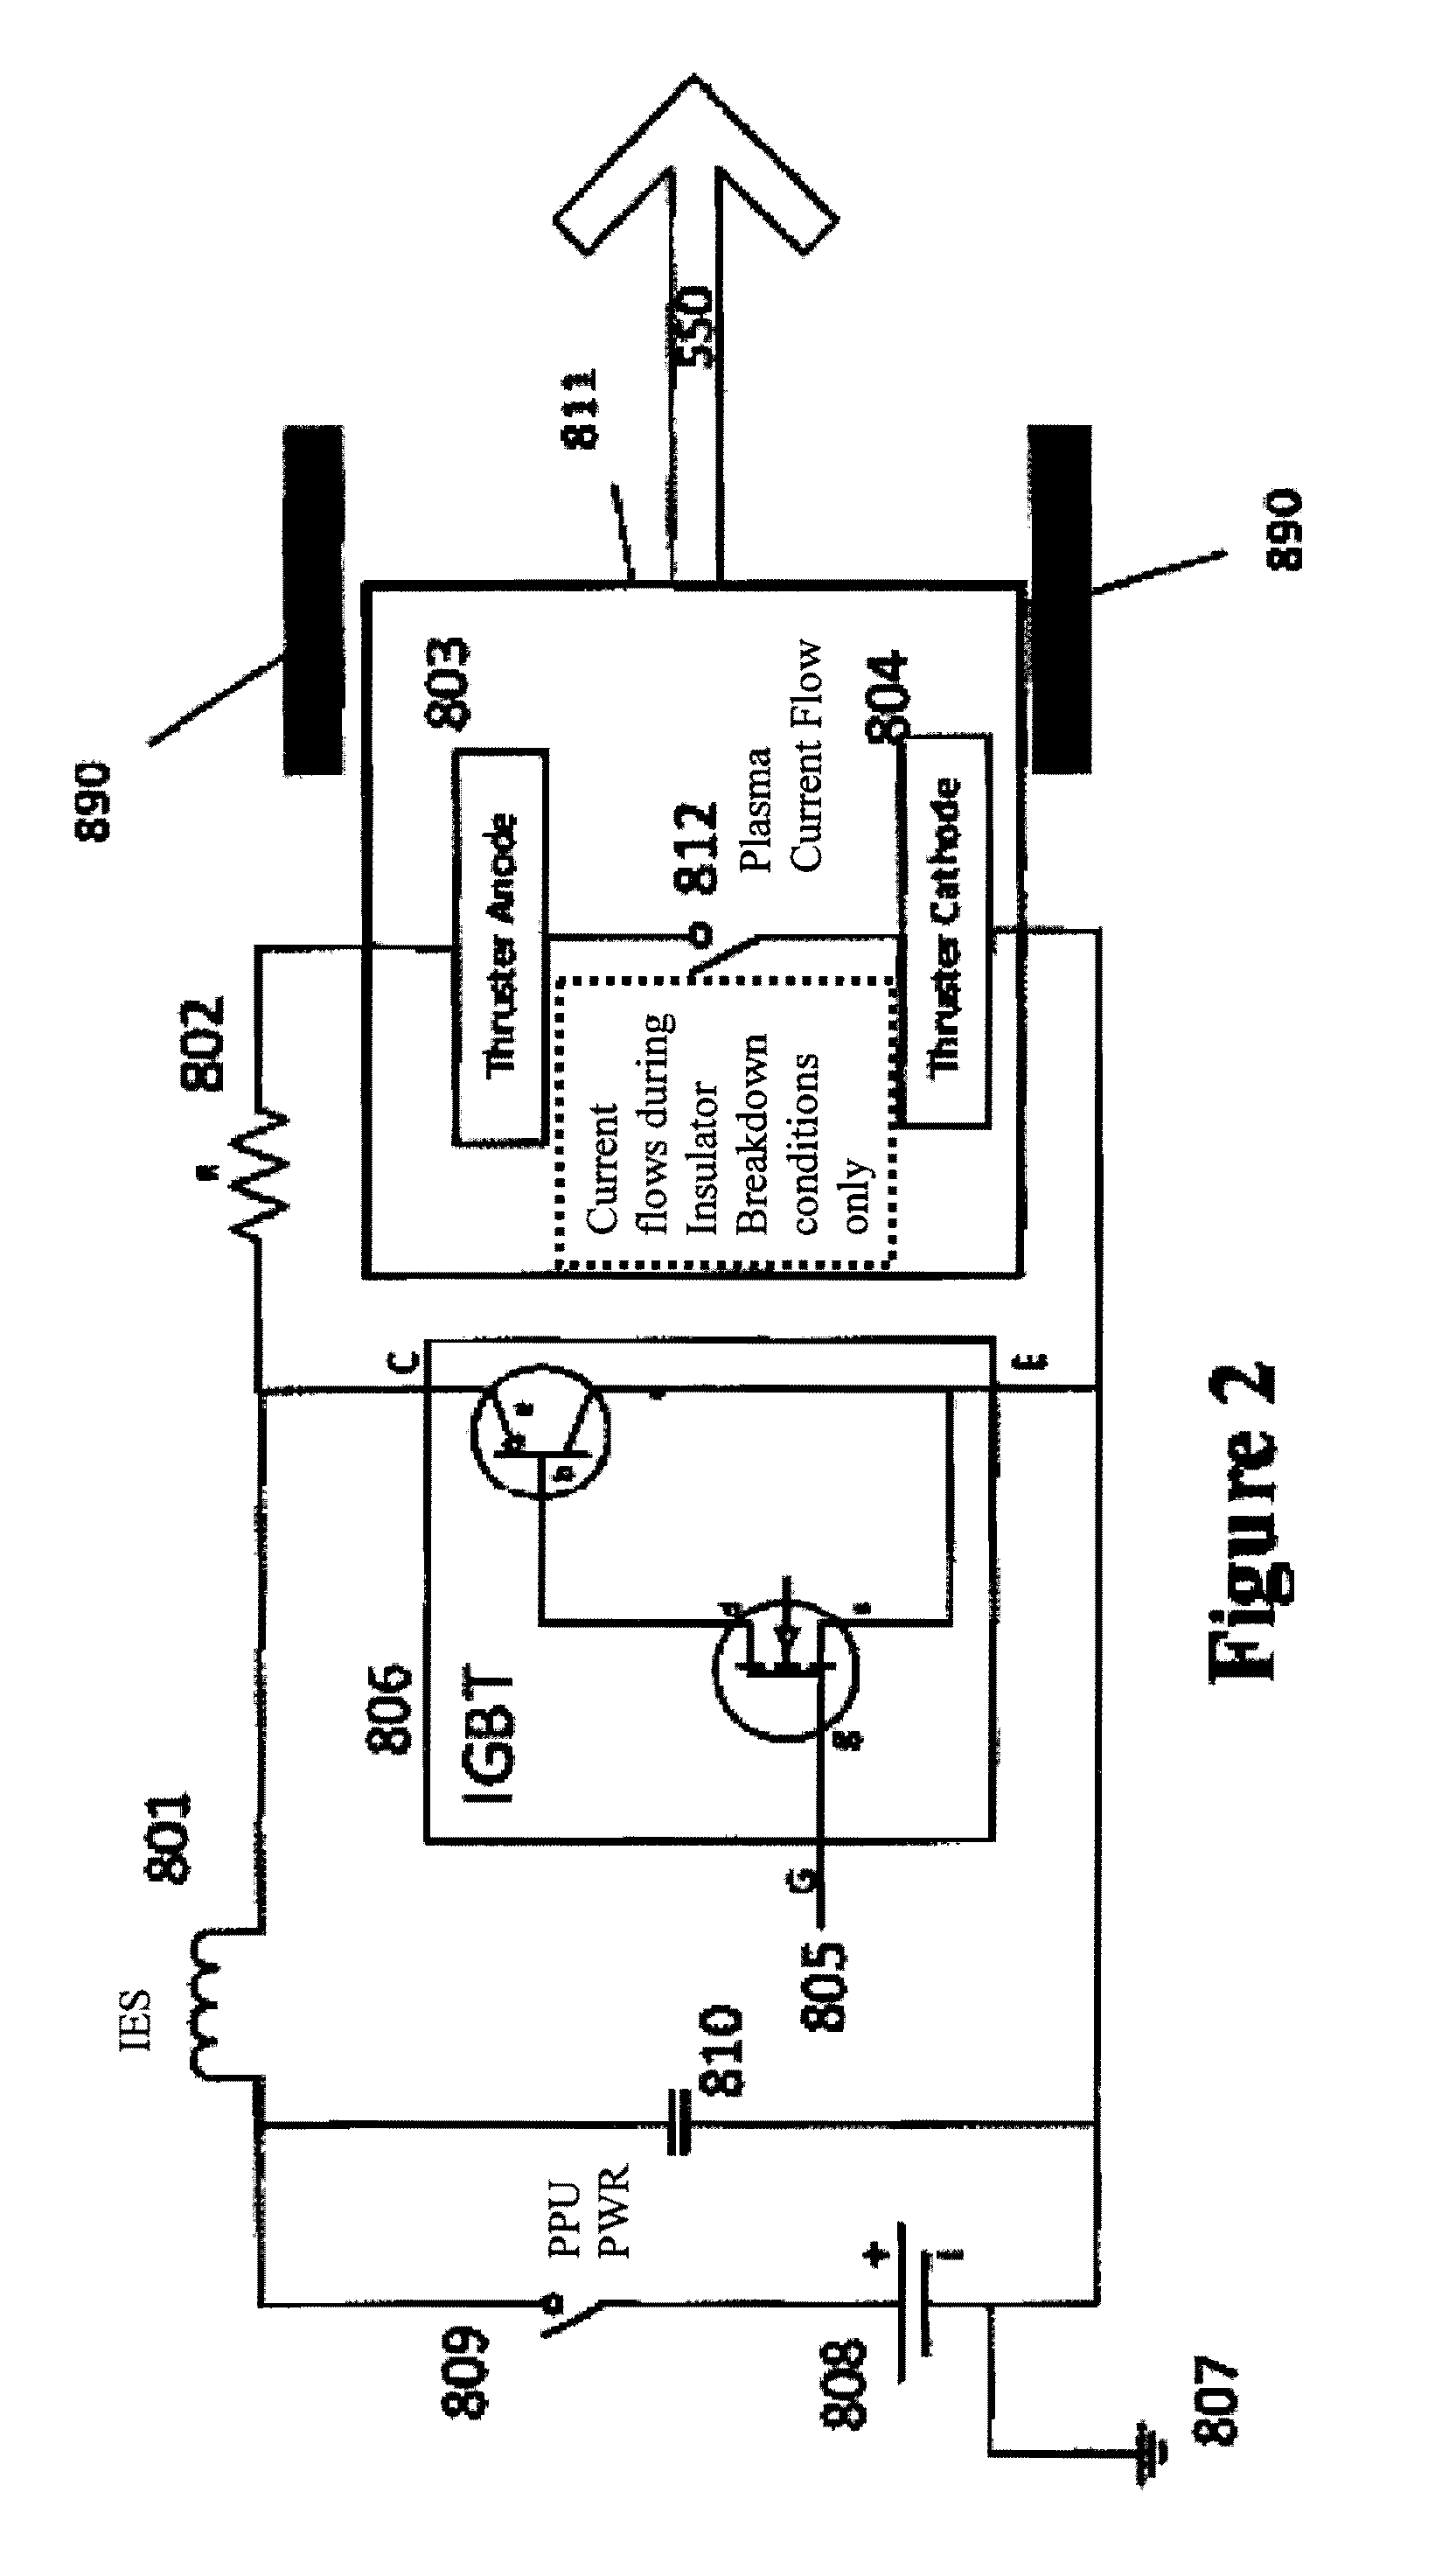 Method and system for a programmable and fault tolerant pulsed plasma thruster